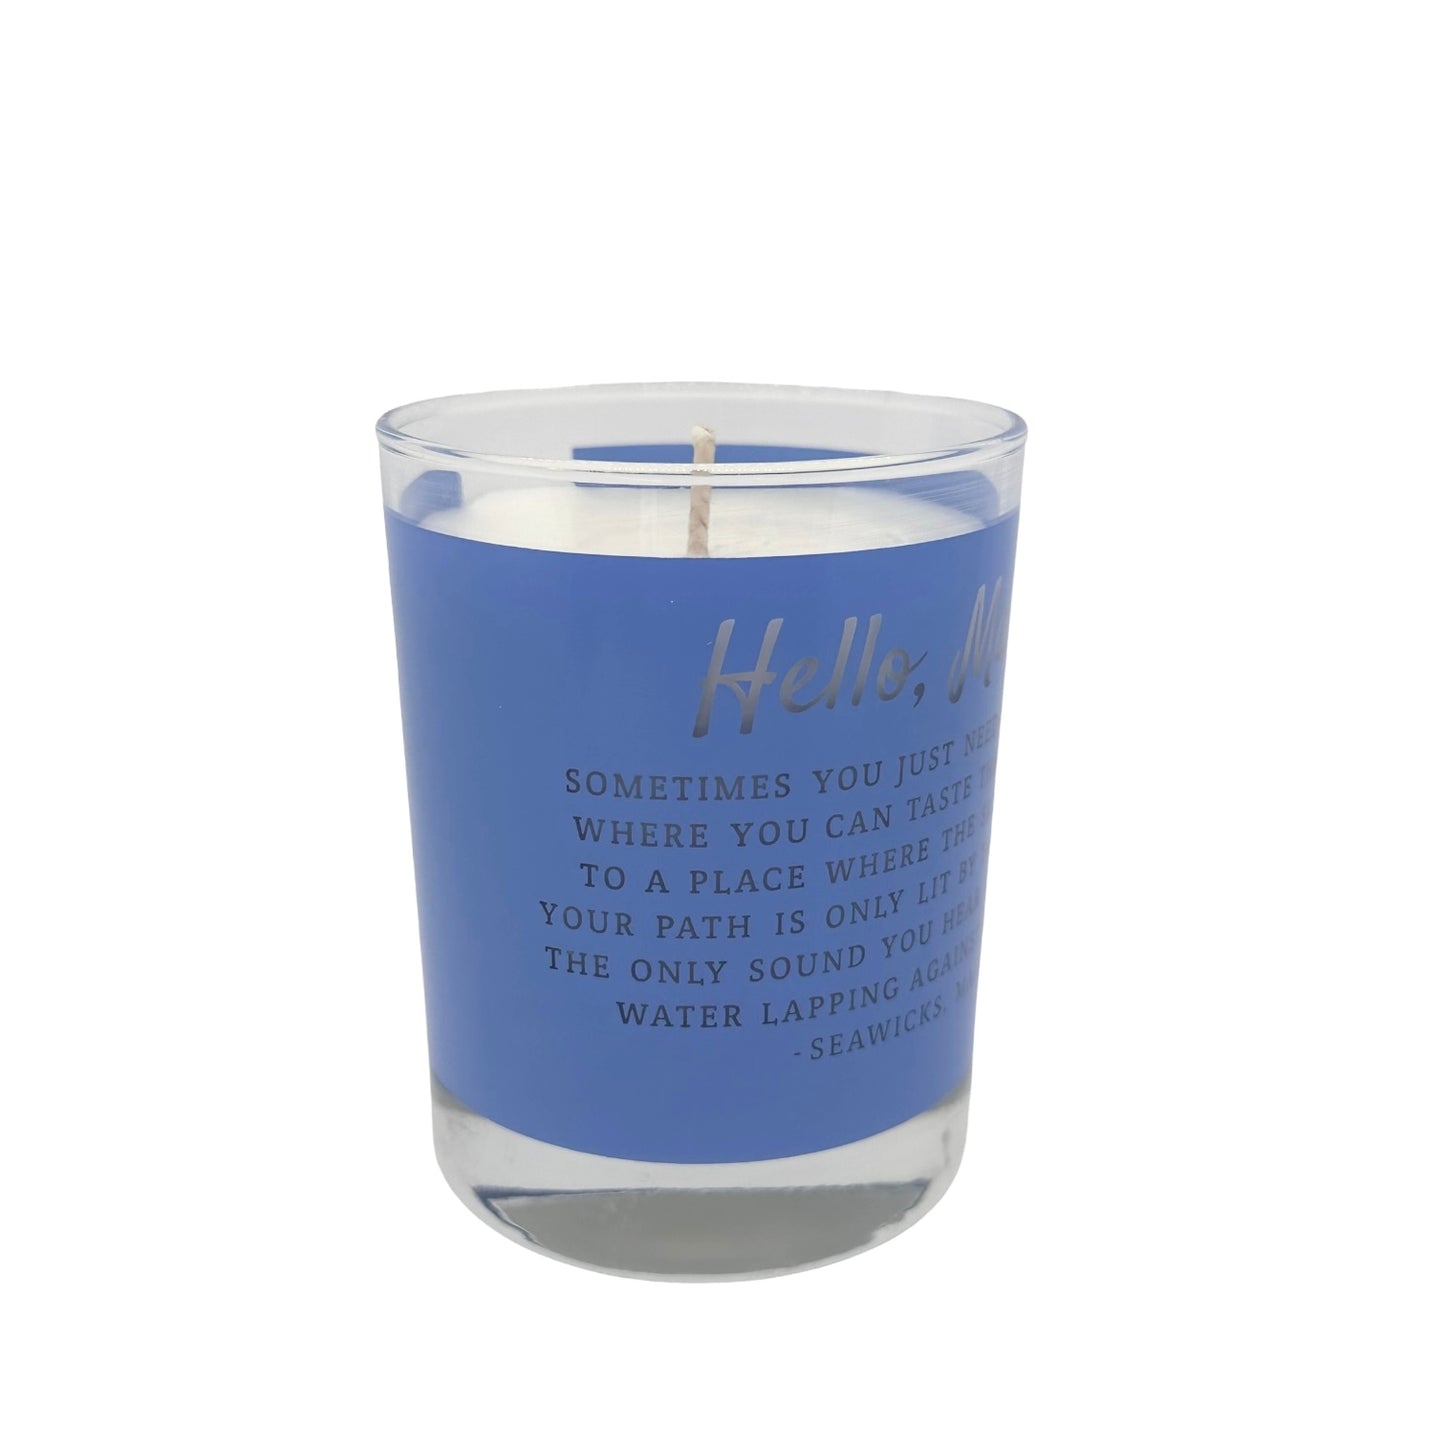 Hello, Maine Blue Ocean Quote Candle